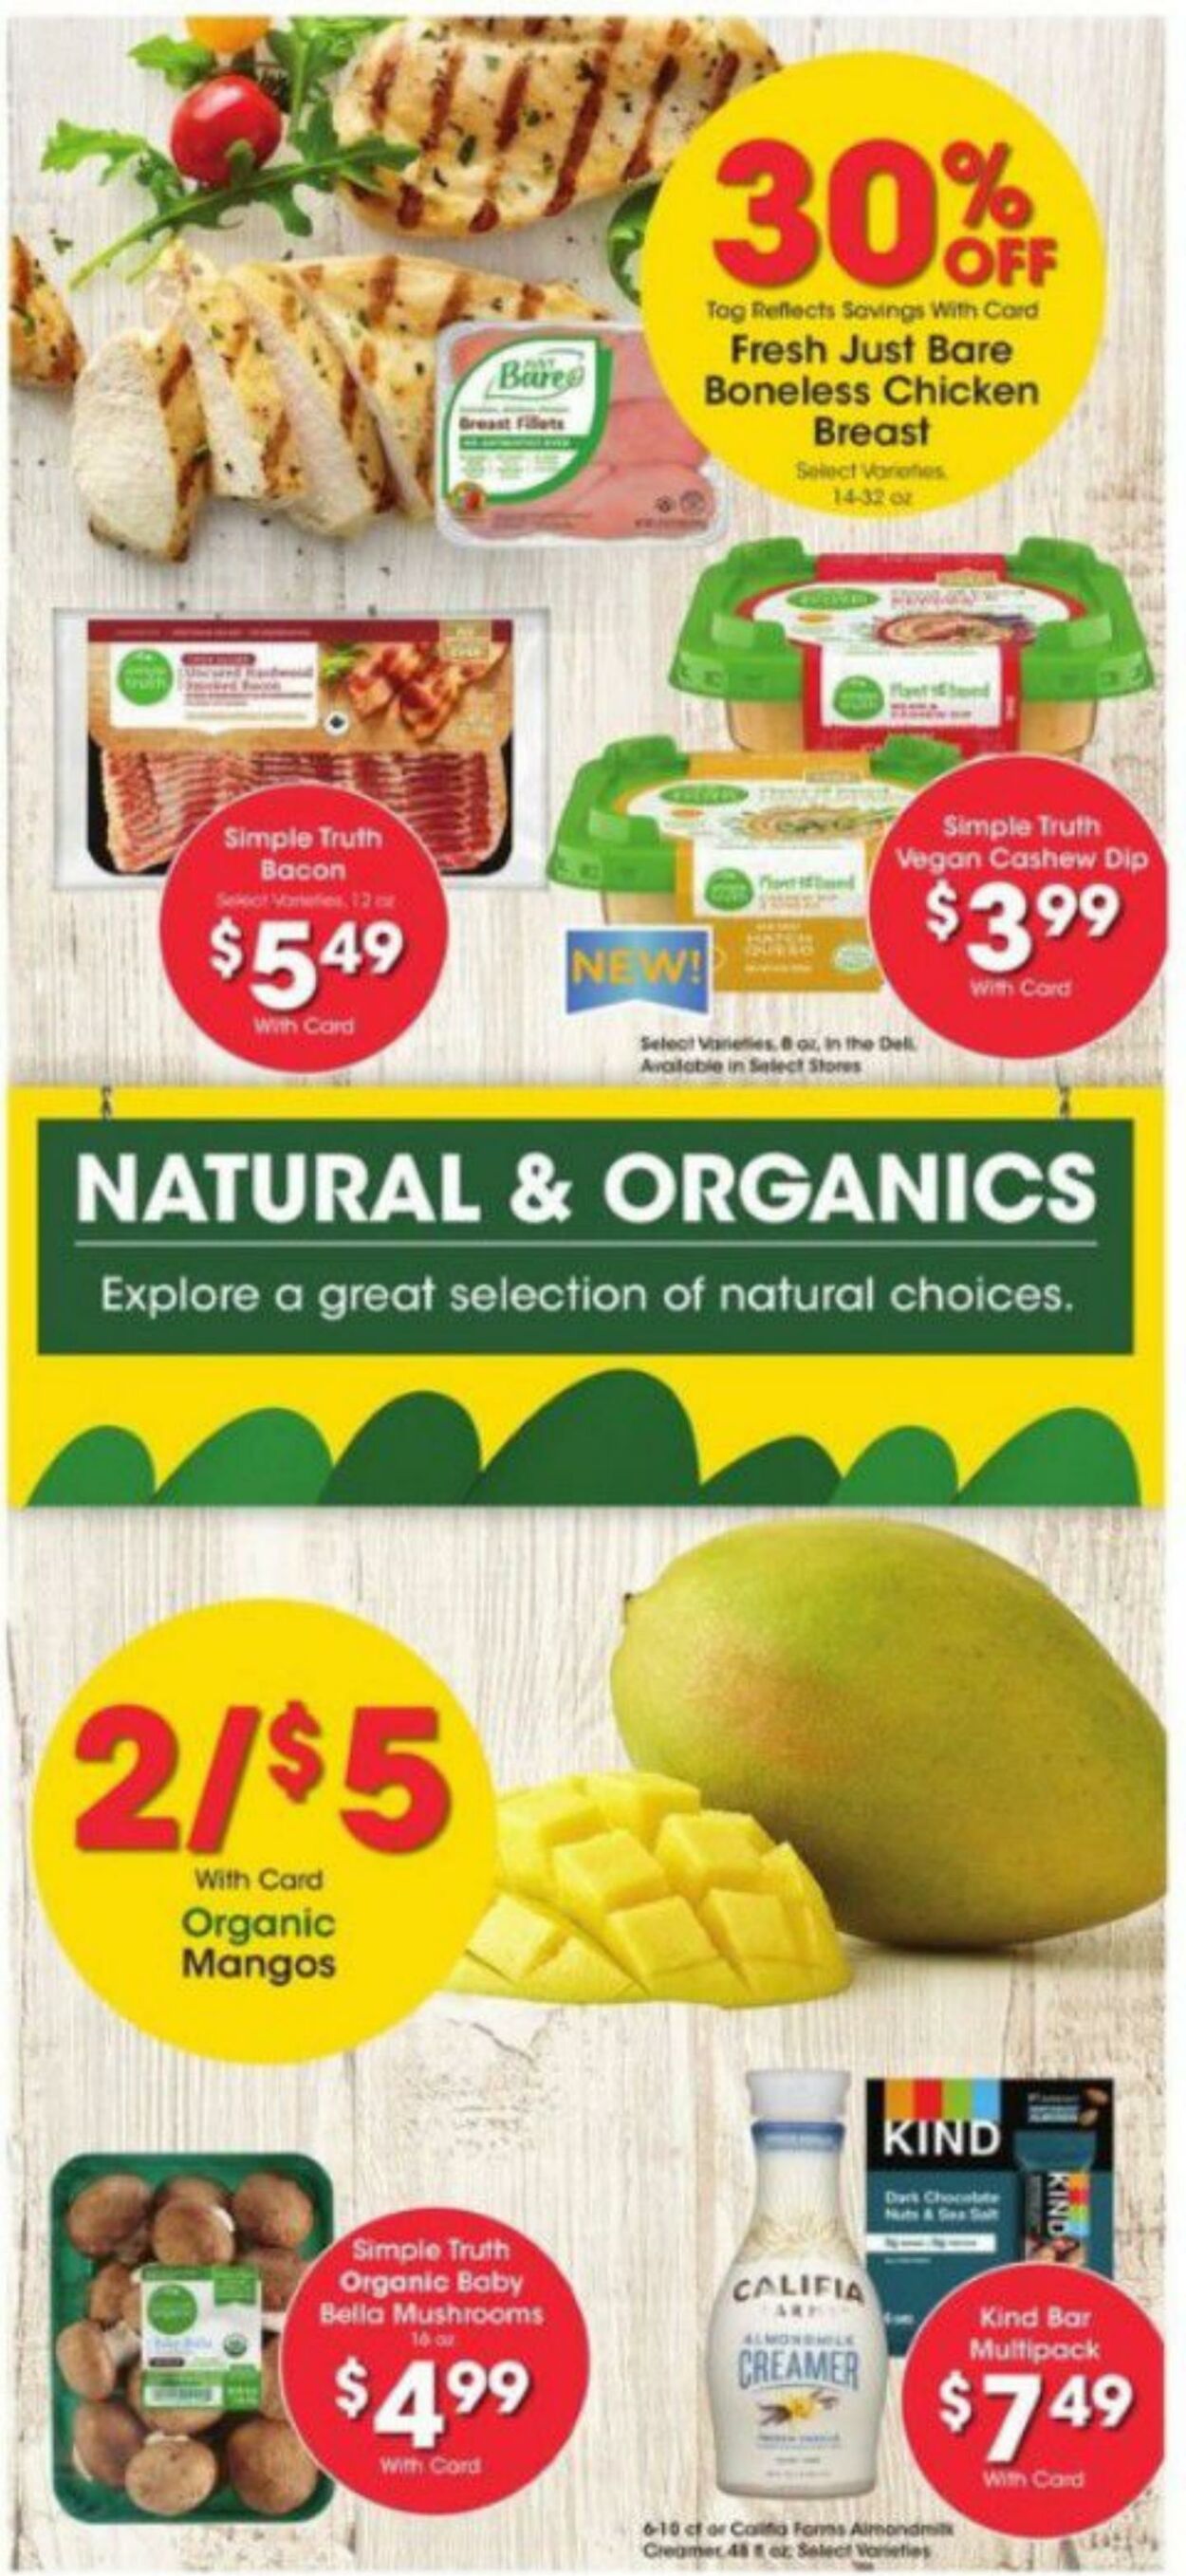 Weekly ad Fry's 05/18/2022 - 05/24/2022